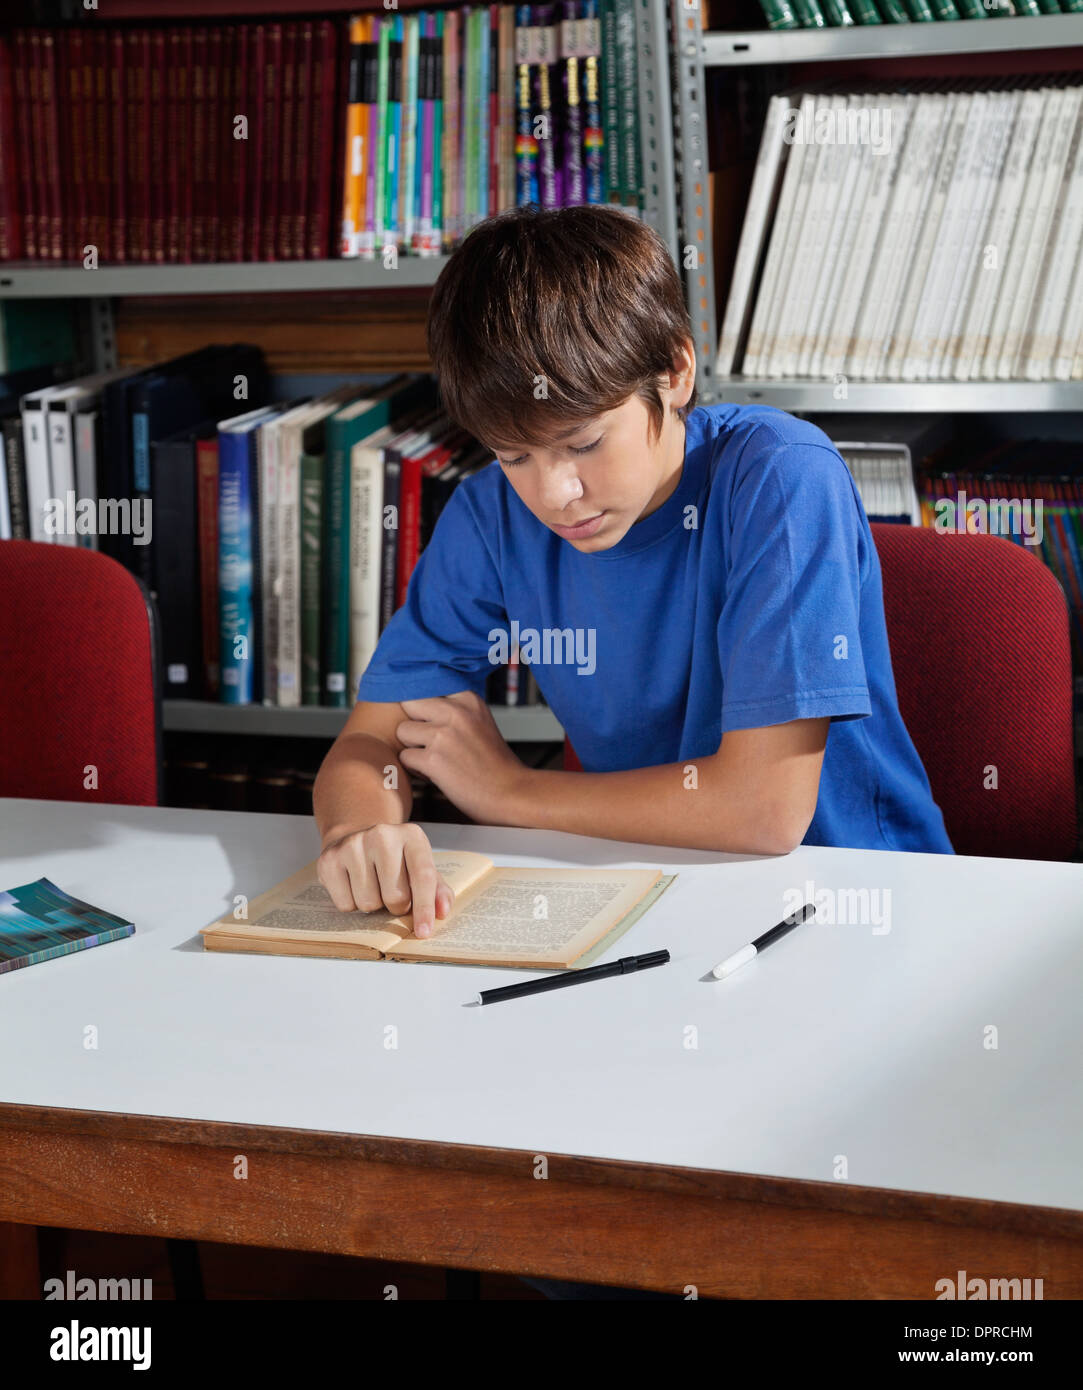 High School Student Studying In Library Stock Photo